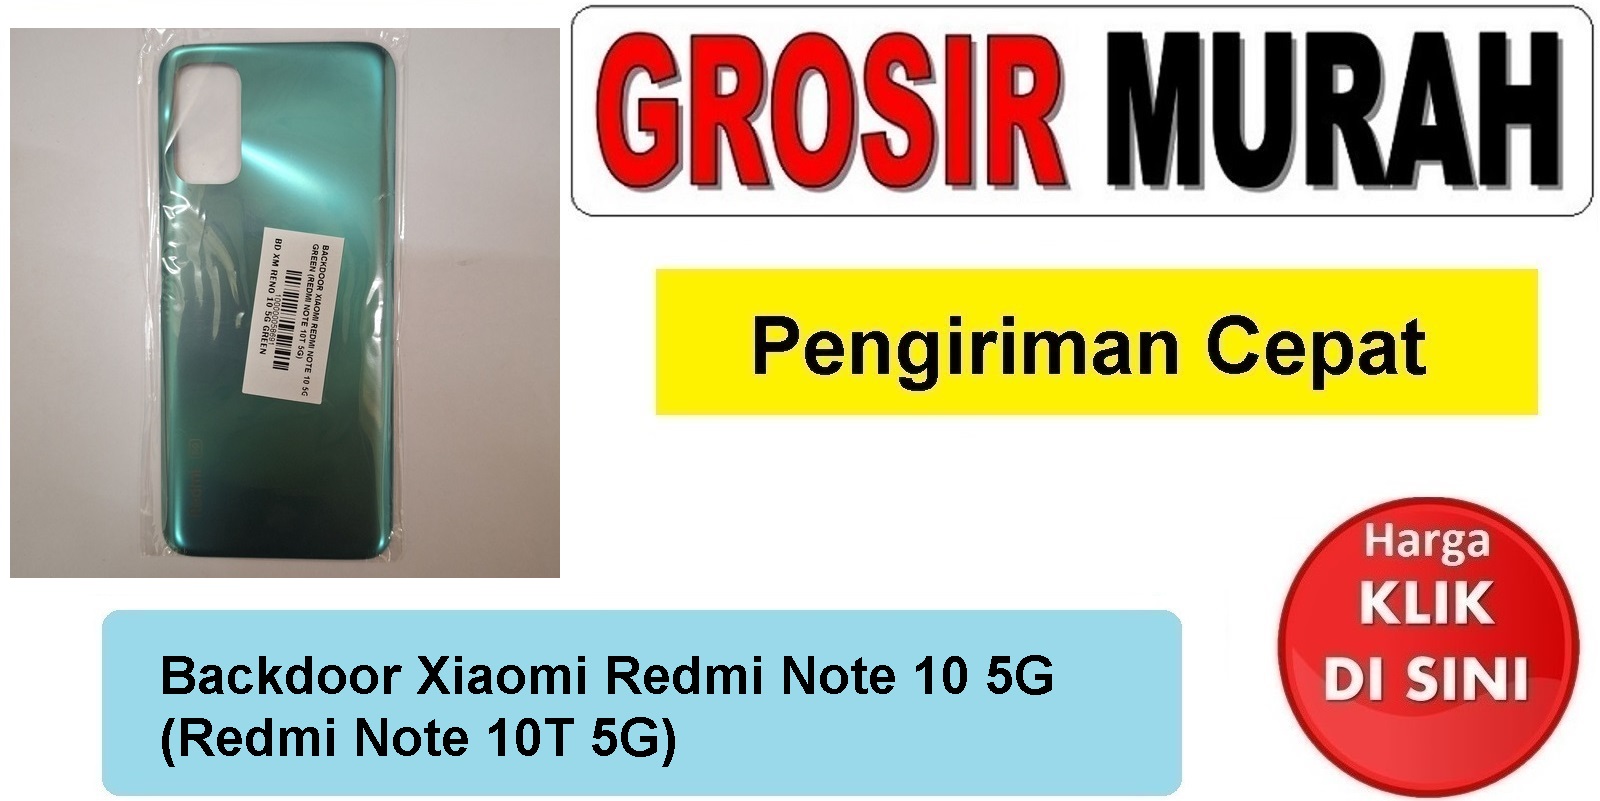 Backdoor Xiaomi Redmi Note 10 5G (Redmi Note 10T 5G) Backcover Tutup Belakang Spare Part Hp Grosir